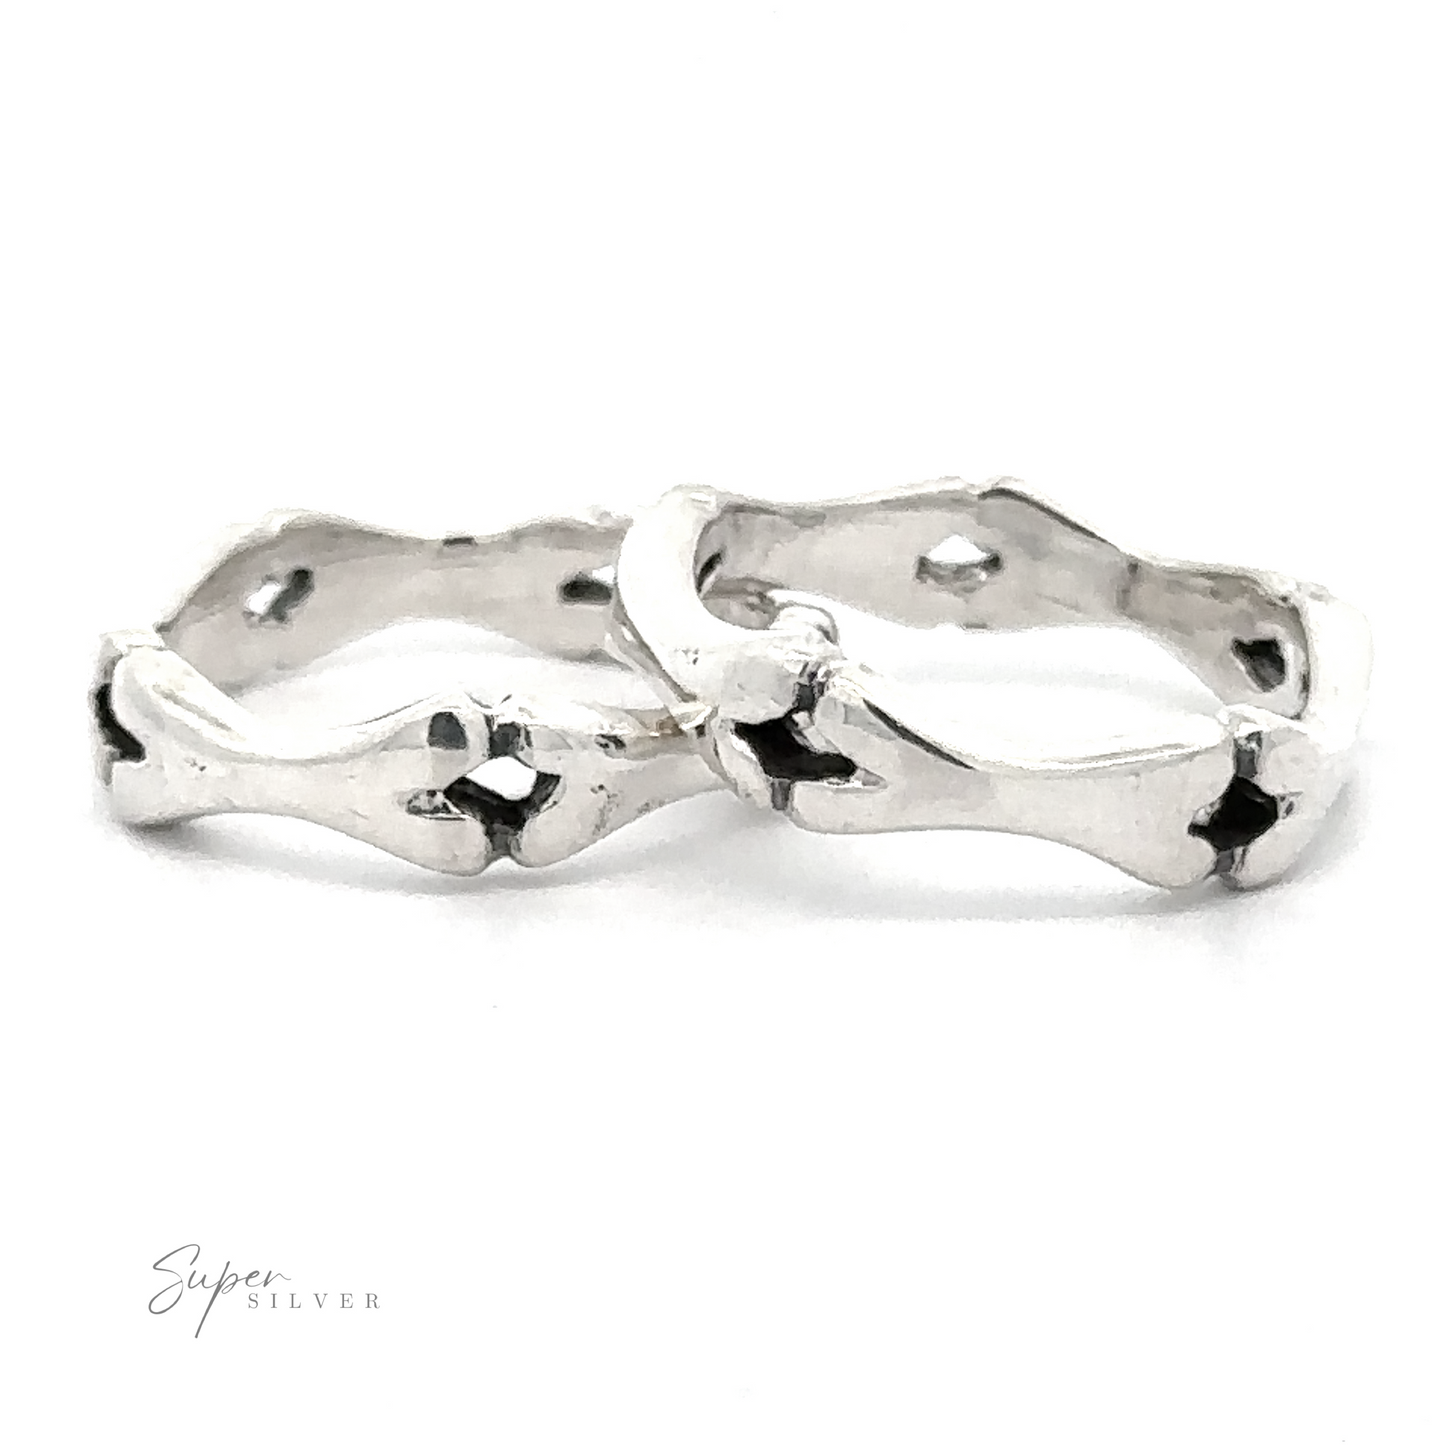 Silver Bones band ring with a bamboo-like design and black accent details on a white background.